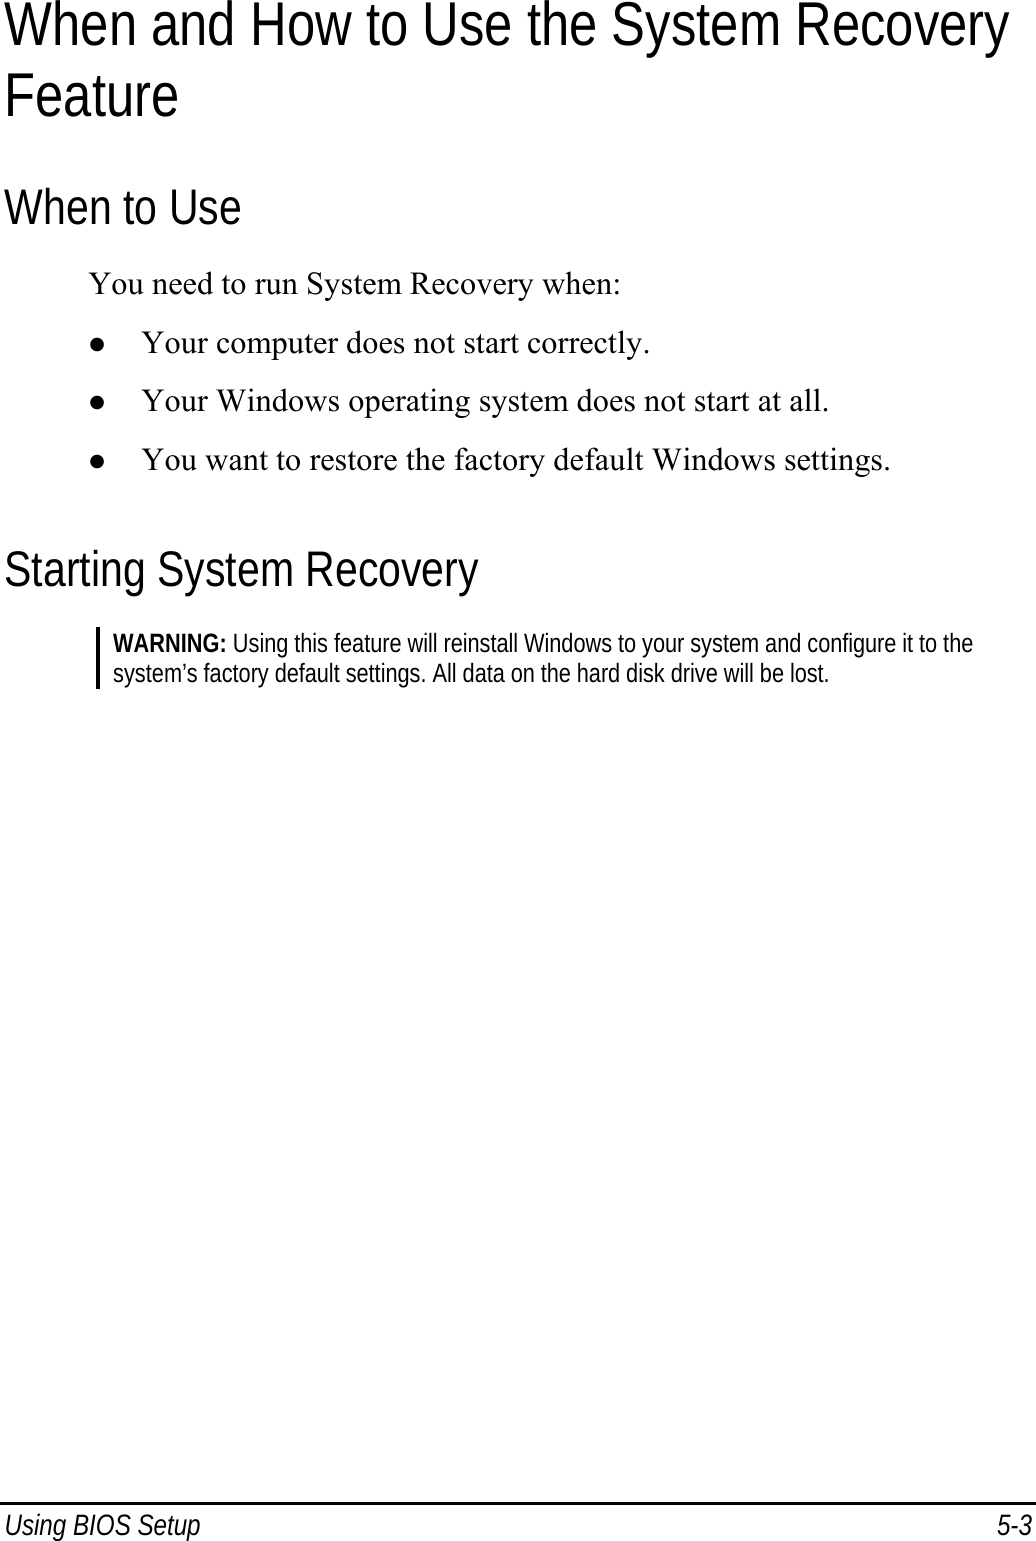  Using BIOS Setup  5-3 When and How to Use the System Recovery Feature When to Use You need to run System Recovery when: z Your computer does not start correctly. z Your Windows operating system does not start at all. z You want to restore the factory default Windows settings. Starting System Recovery WARNING: Using this feature will reinstall Windows to your system and configure it to the system’s factory default settings. All data on the hard disk drive will be lost.  